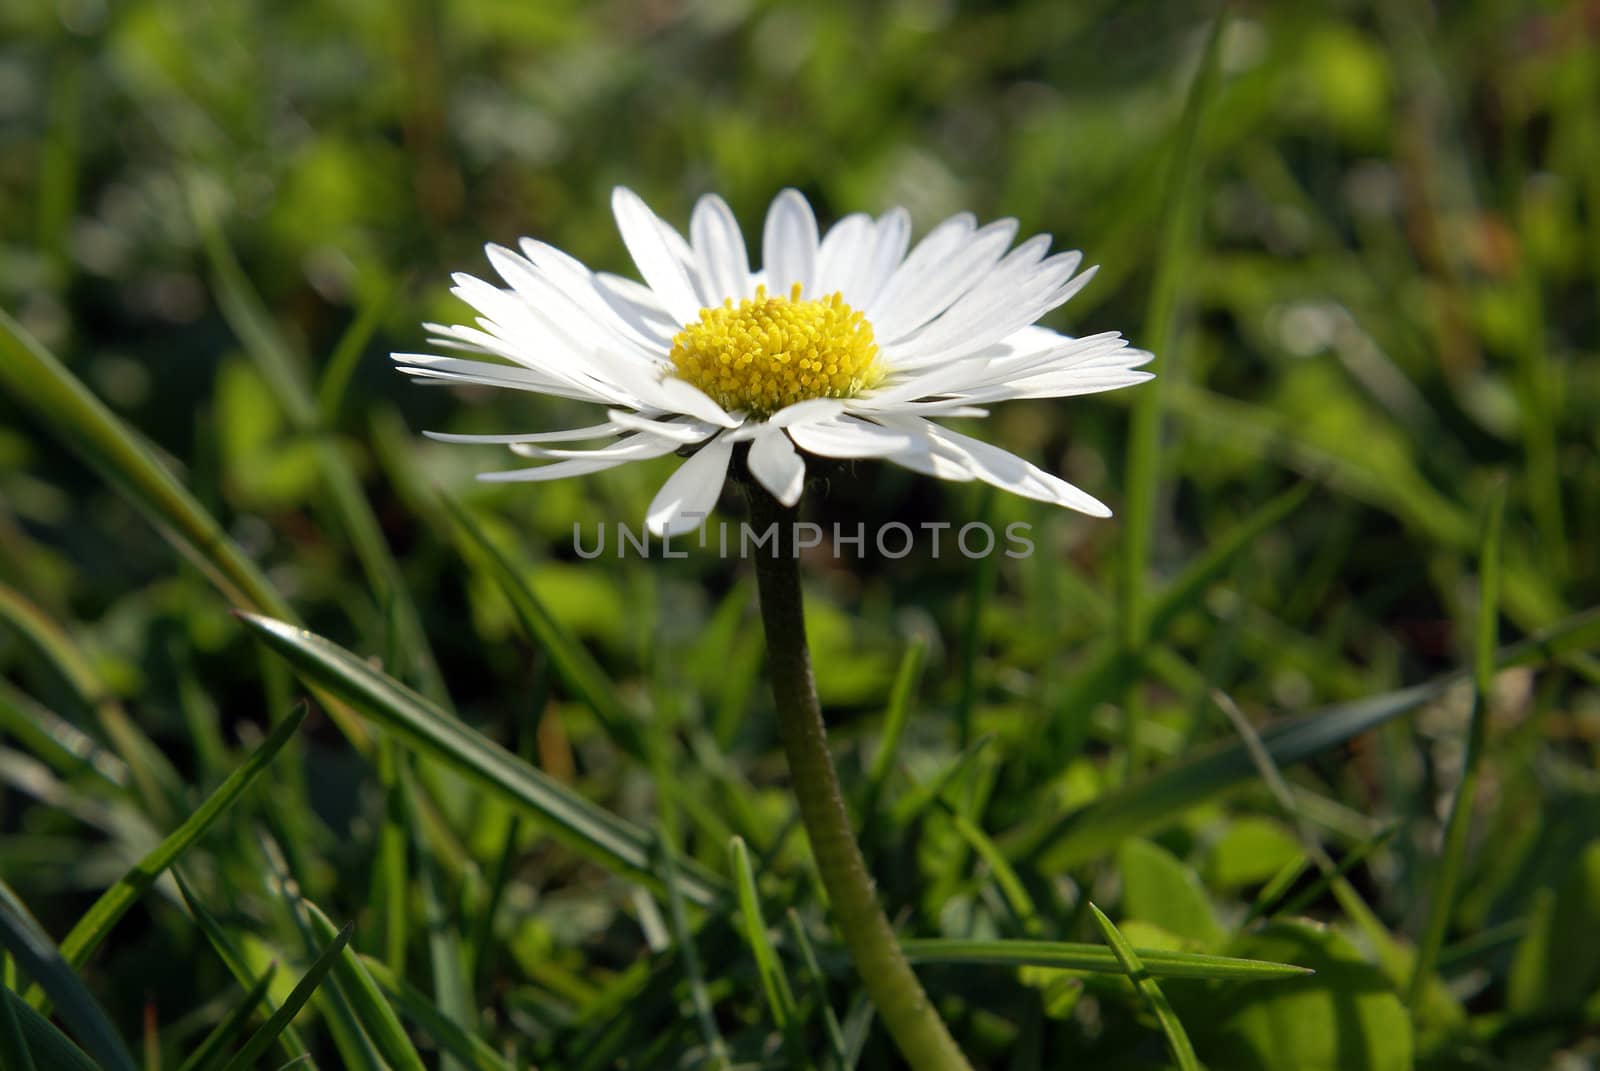 A single daisy flower in the grass.